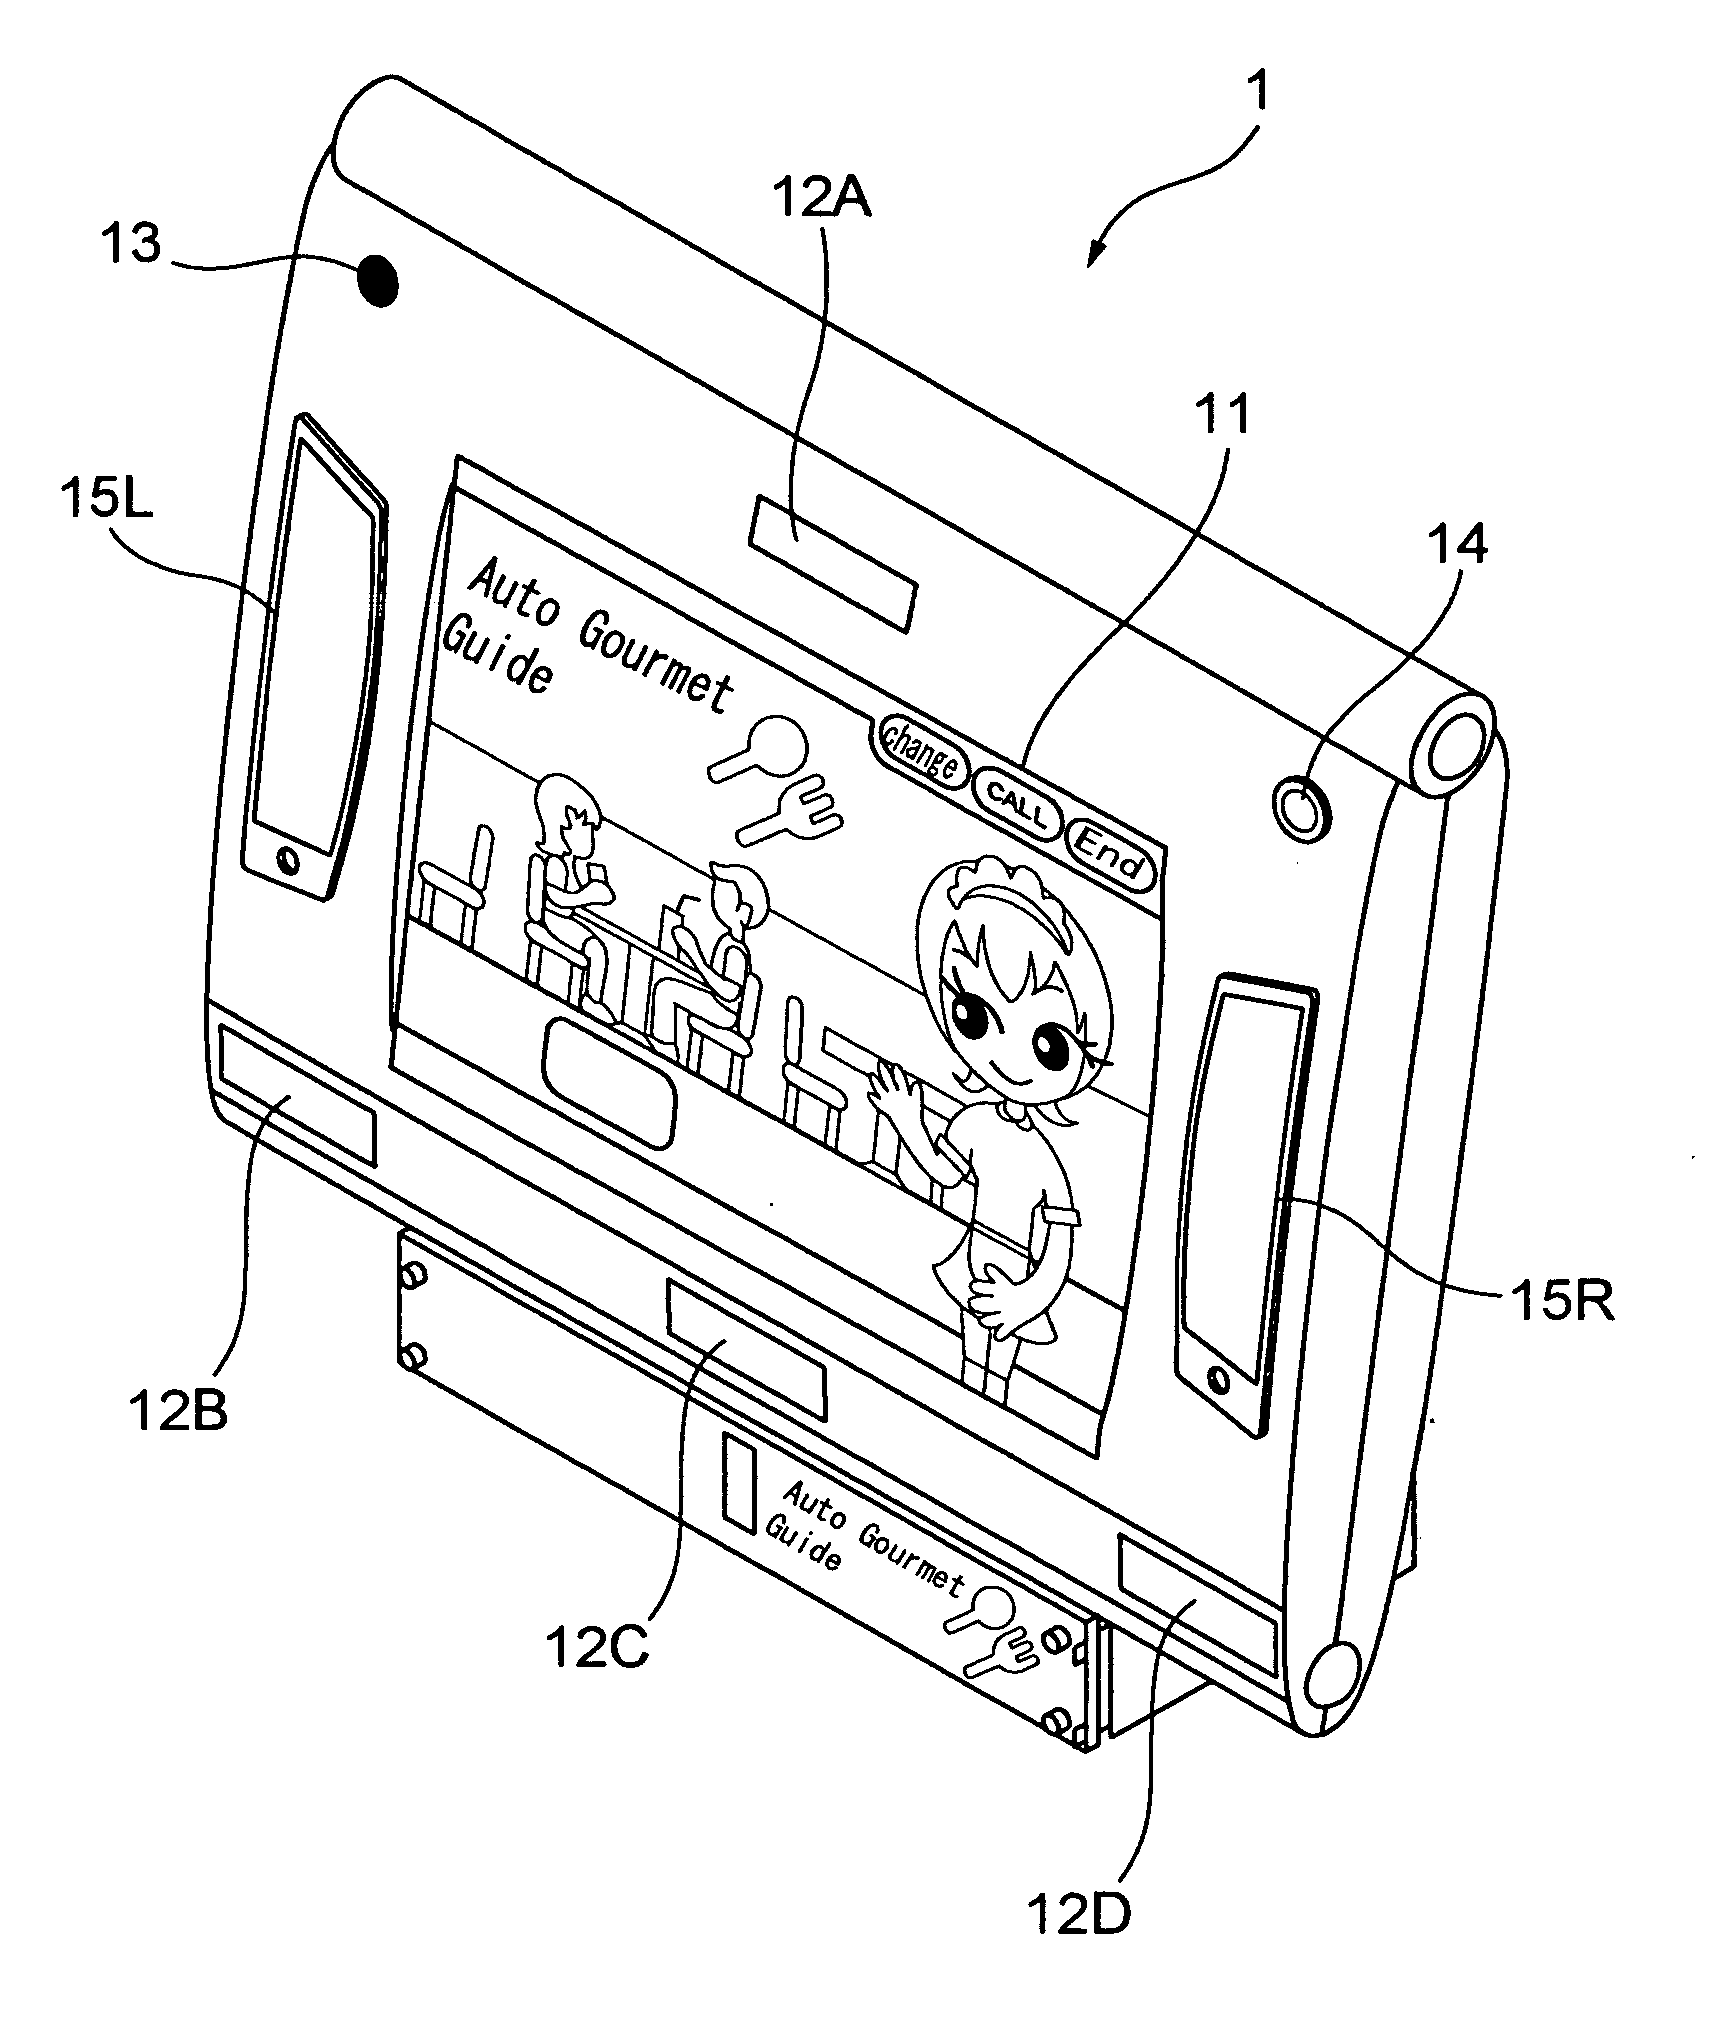 Conversation control apparatus, conversation control method, and programs therefor